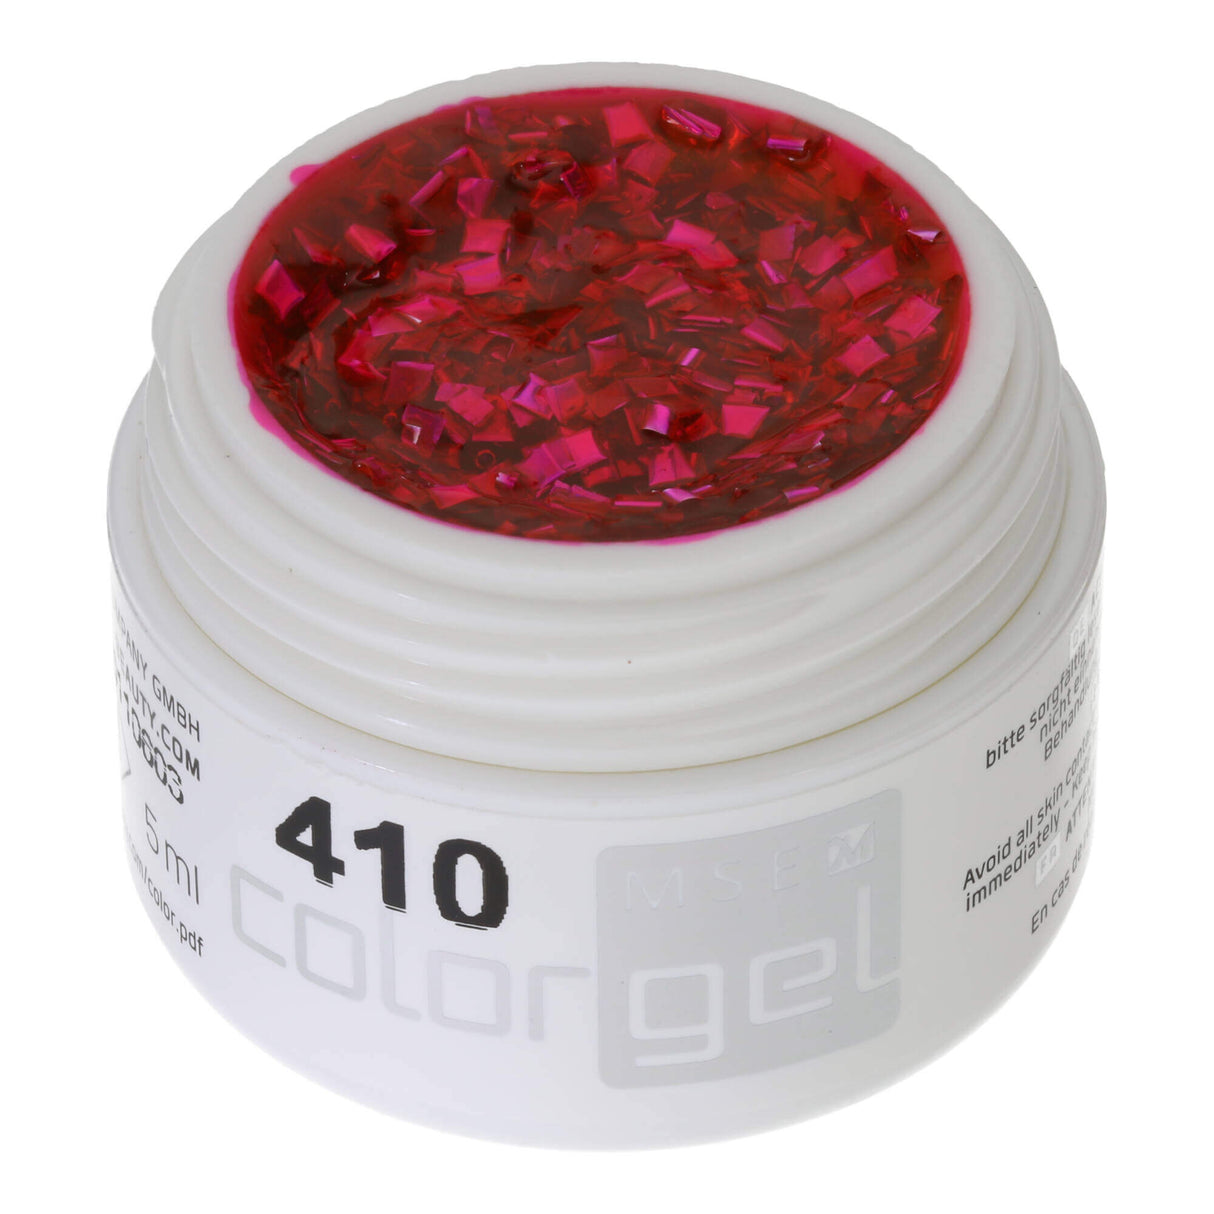 # 410 Premium-EFFEKT Color Gel 5ml Translucent, intensely pink-colored even gel with a rainbow effect